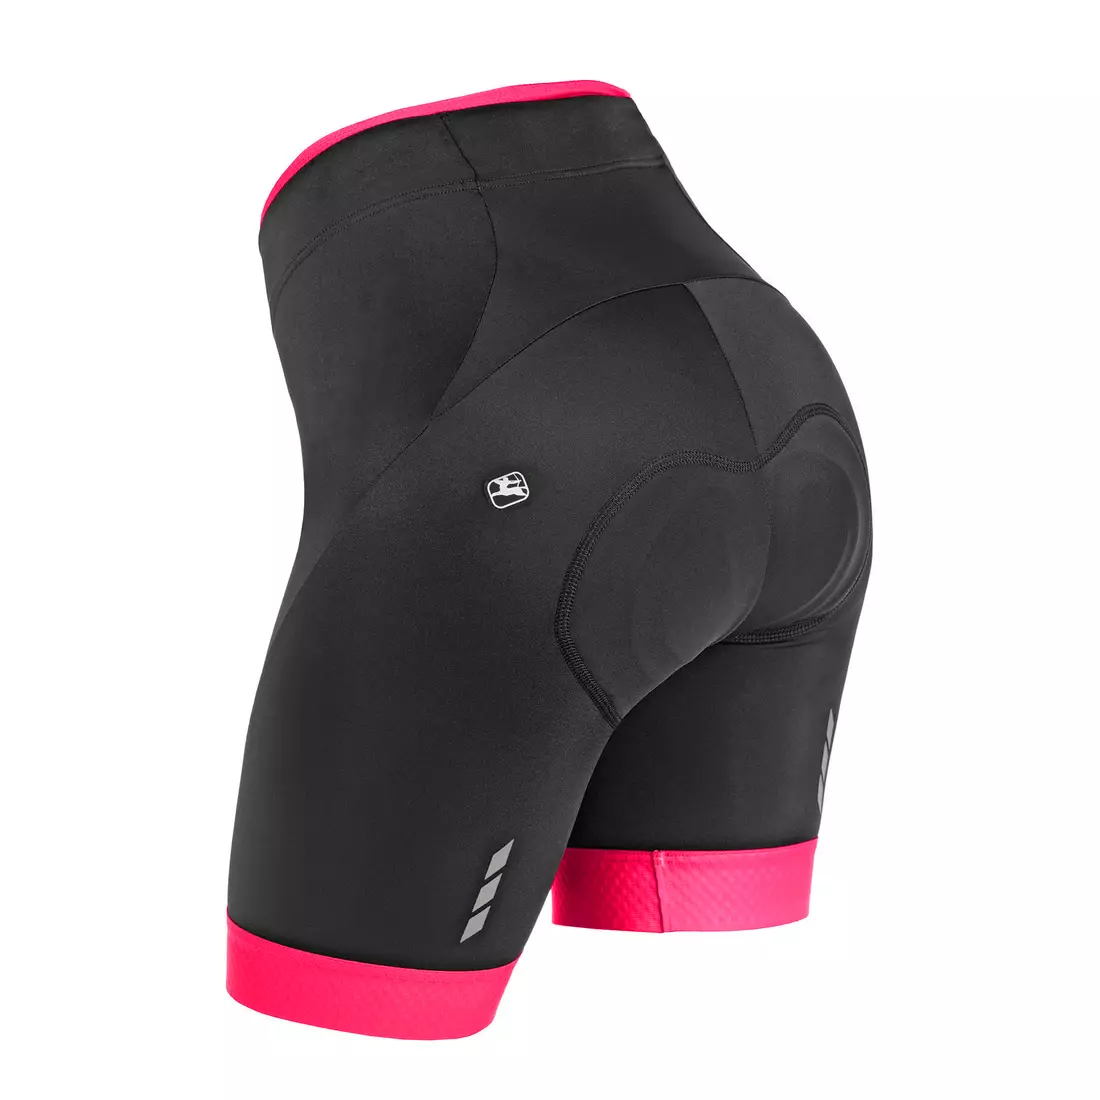 GIORDANA SILVERLINE women's cycling shorts, black and pink